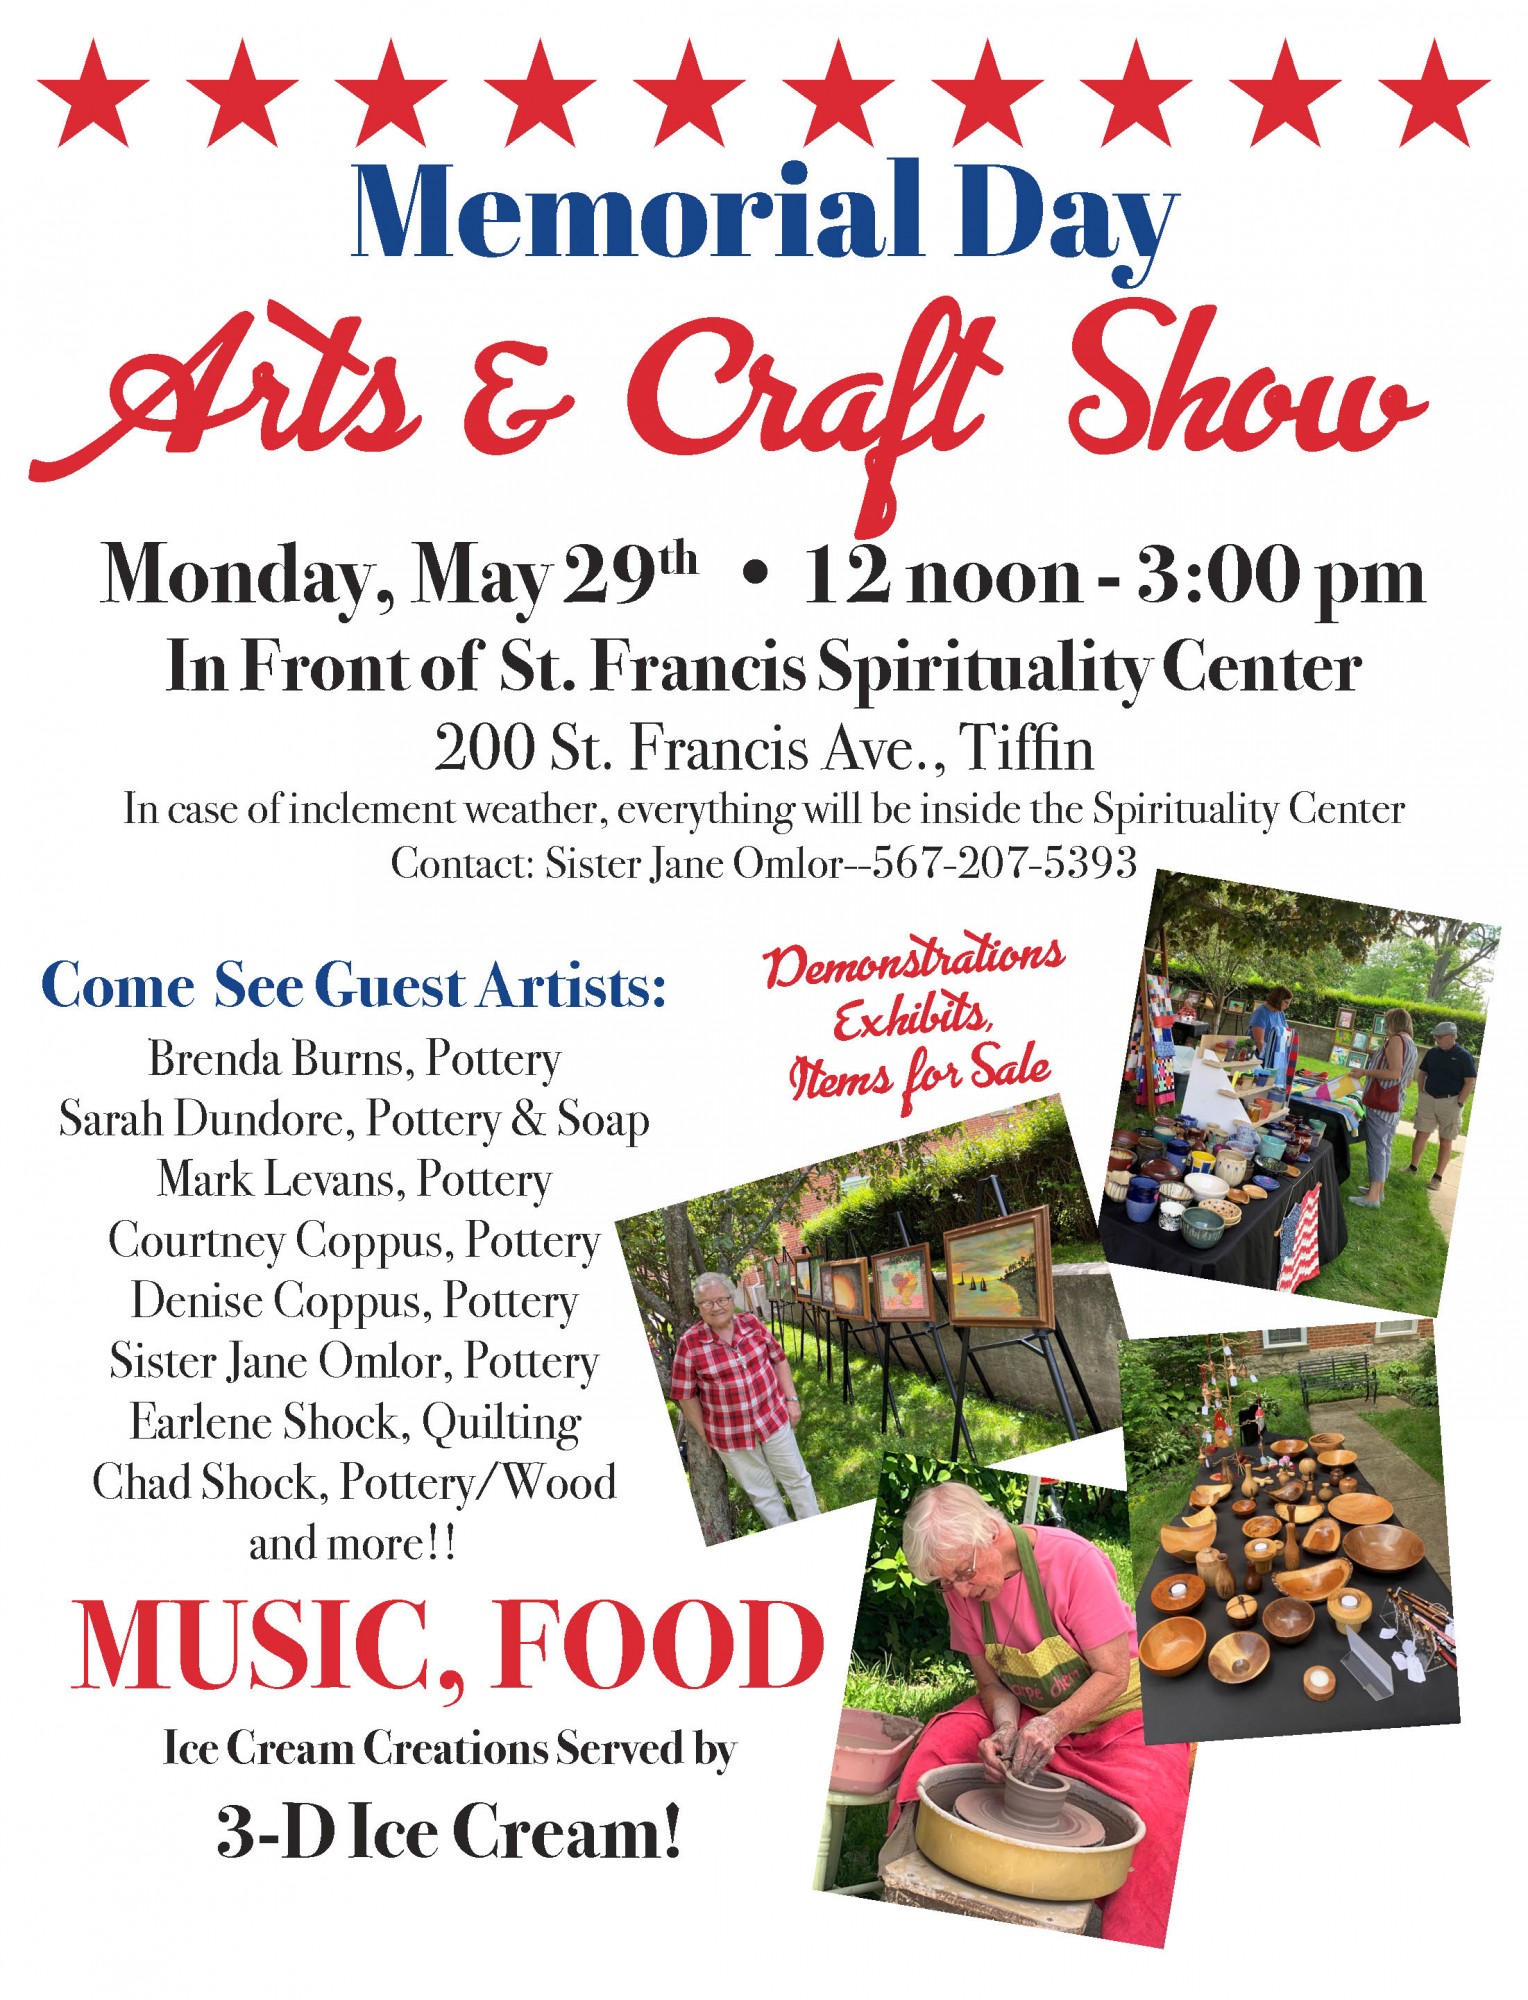 Memorial Day Arts & Crafts Show